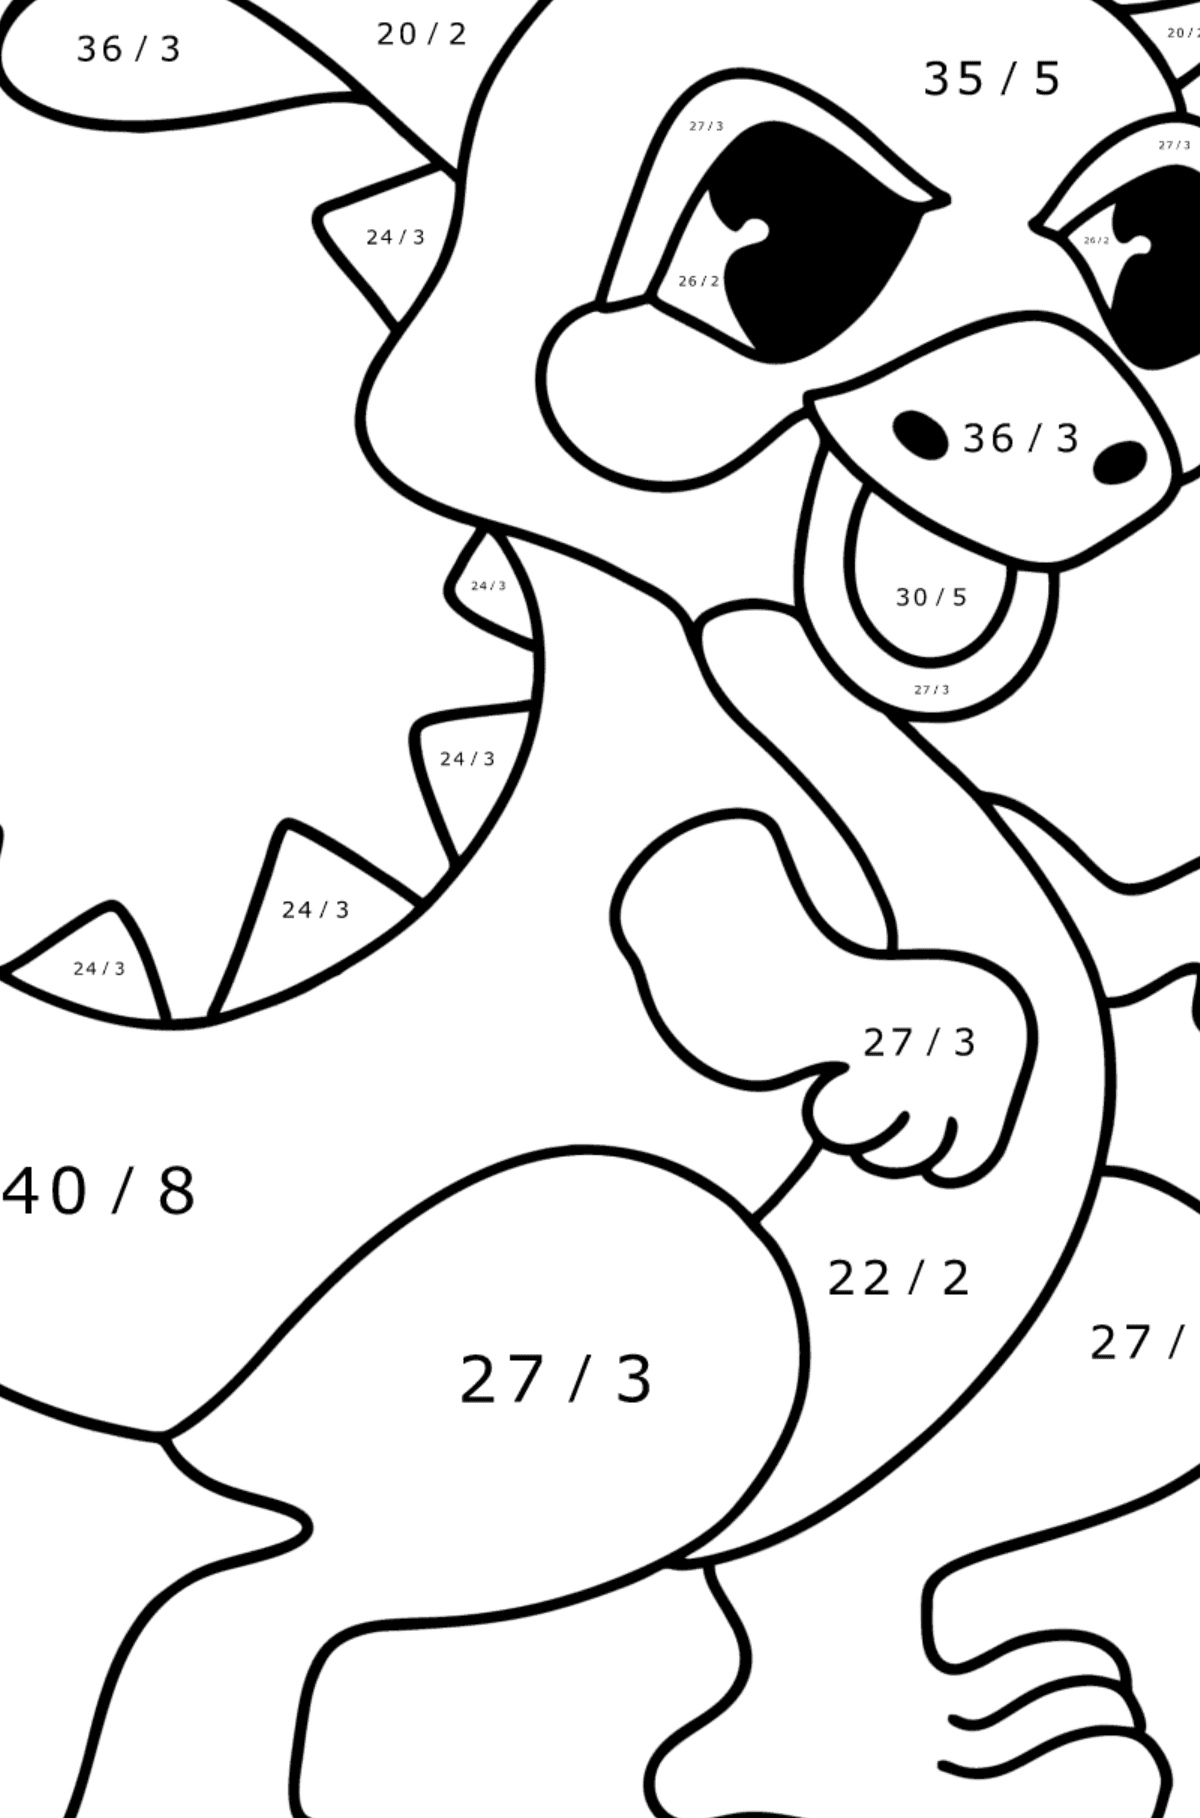 Cartoon dragon coloring page - Math Coloring - Division for Kids